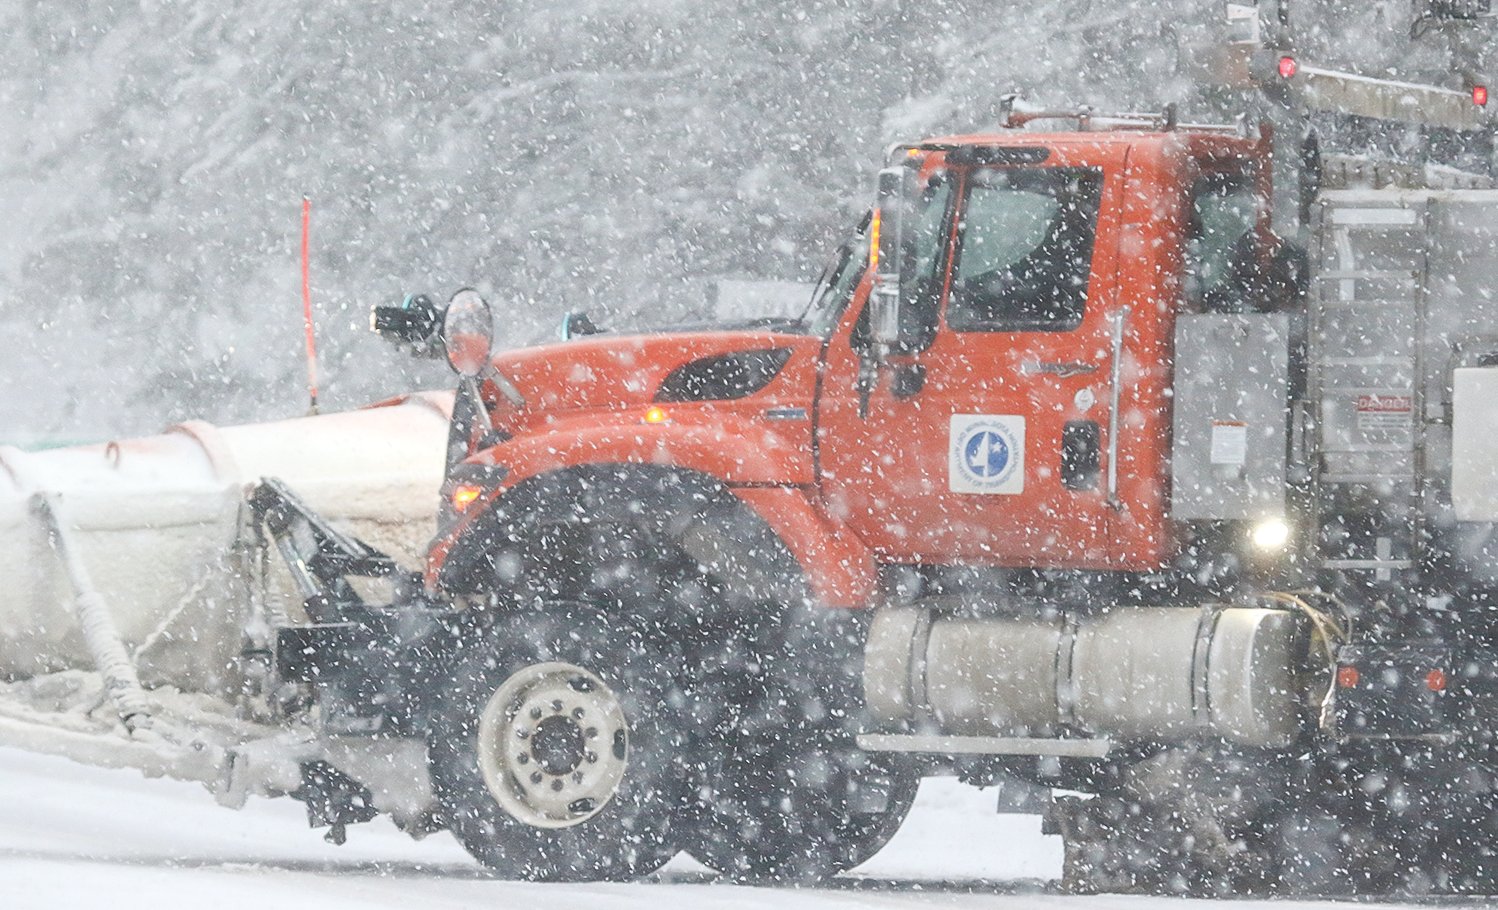 A MnDOT 
snowplow was out working Hwy. 169 in heavy snow on Wednesday.